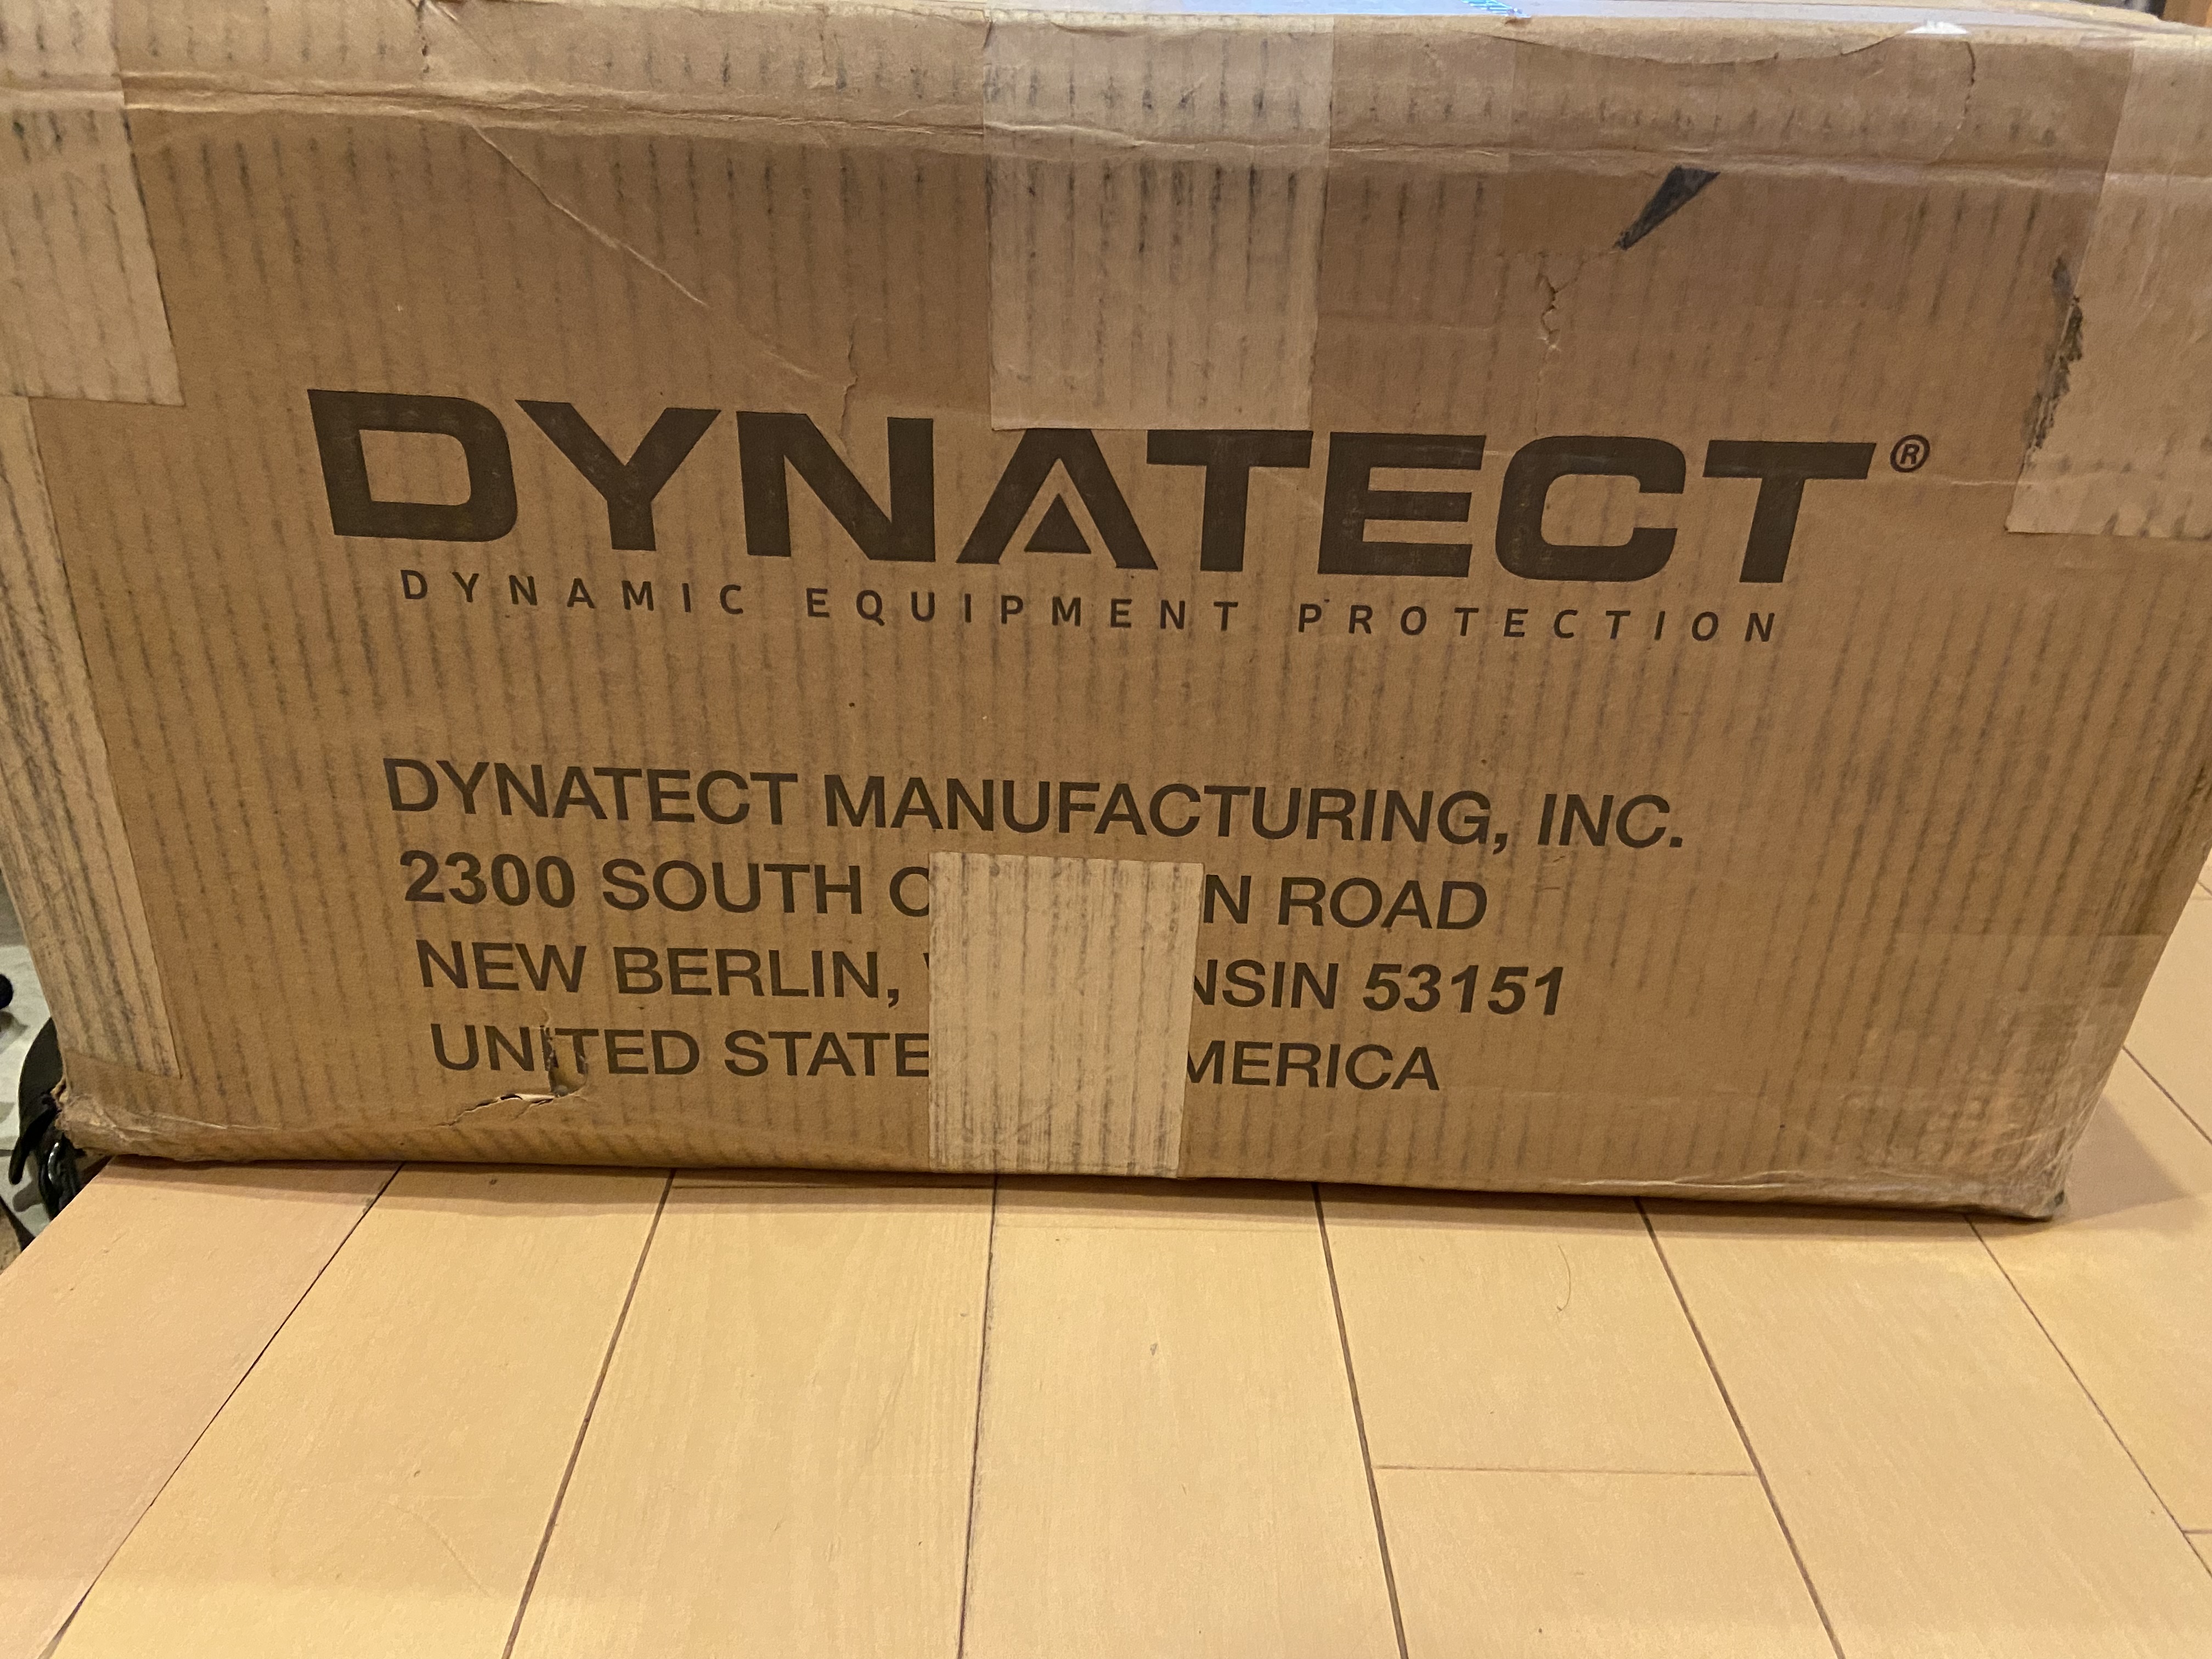 Dynatect dynamic equipment protection